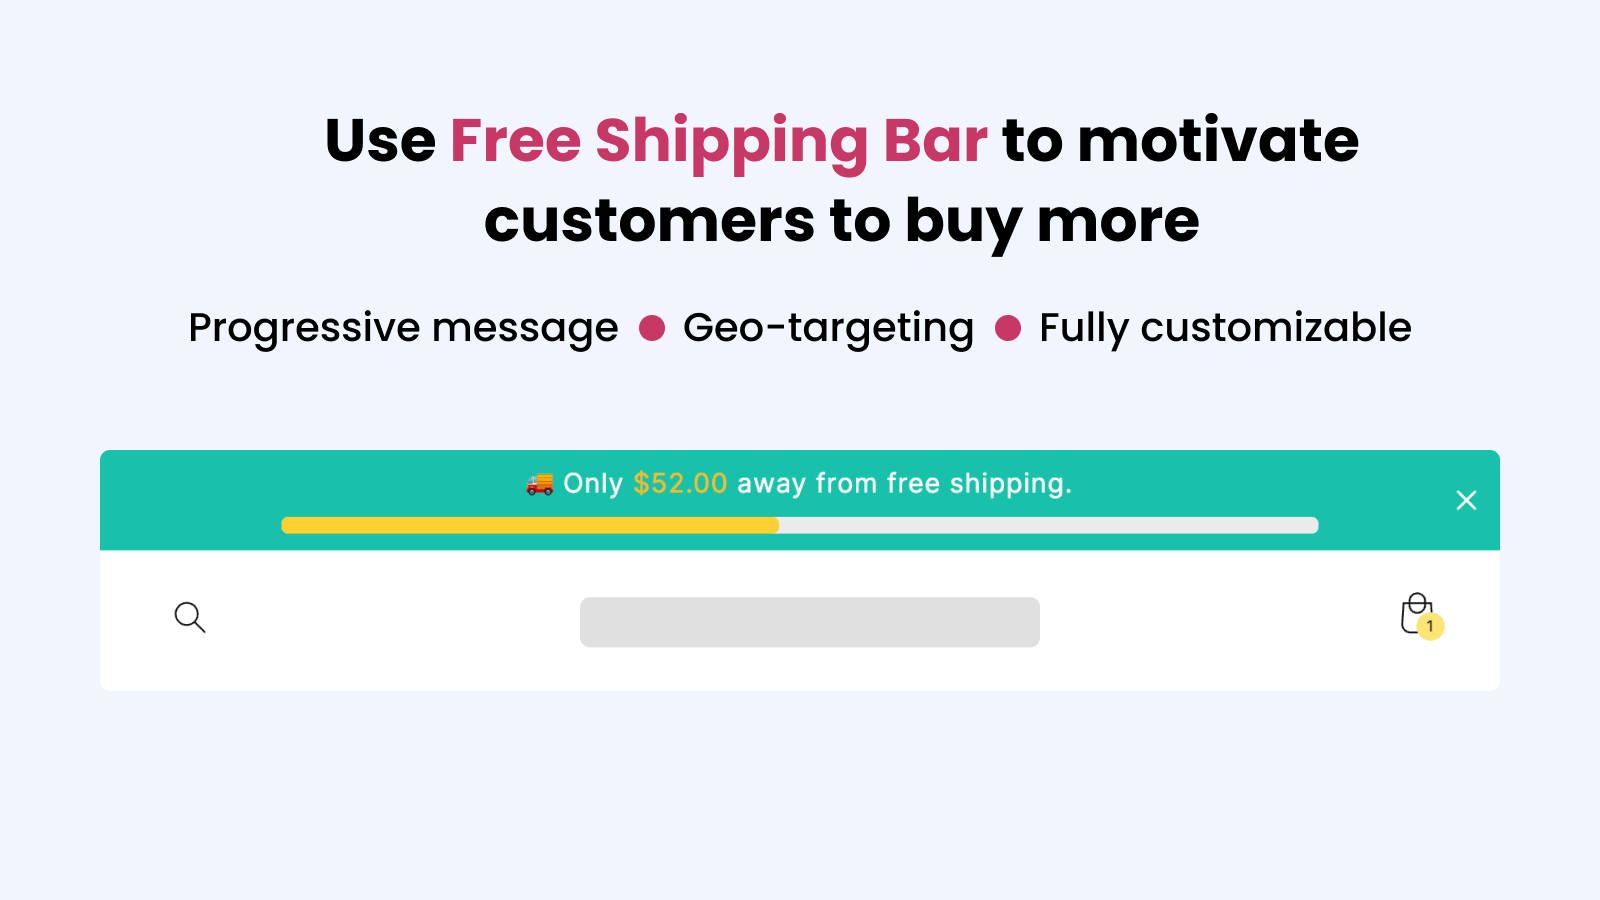 Use Free Shipping Bar to motivate customers to buy more